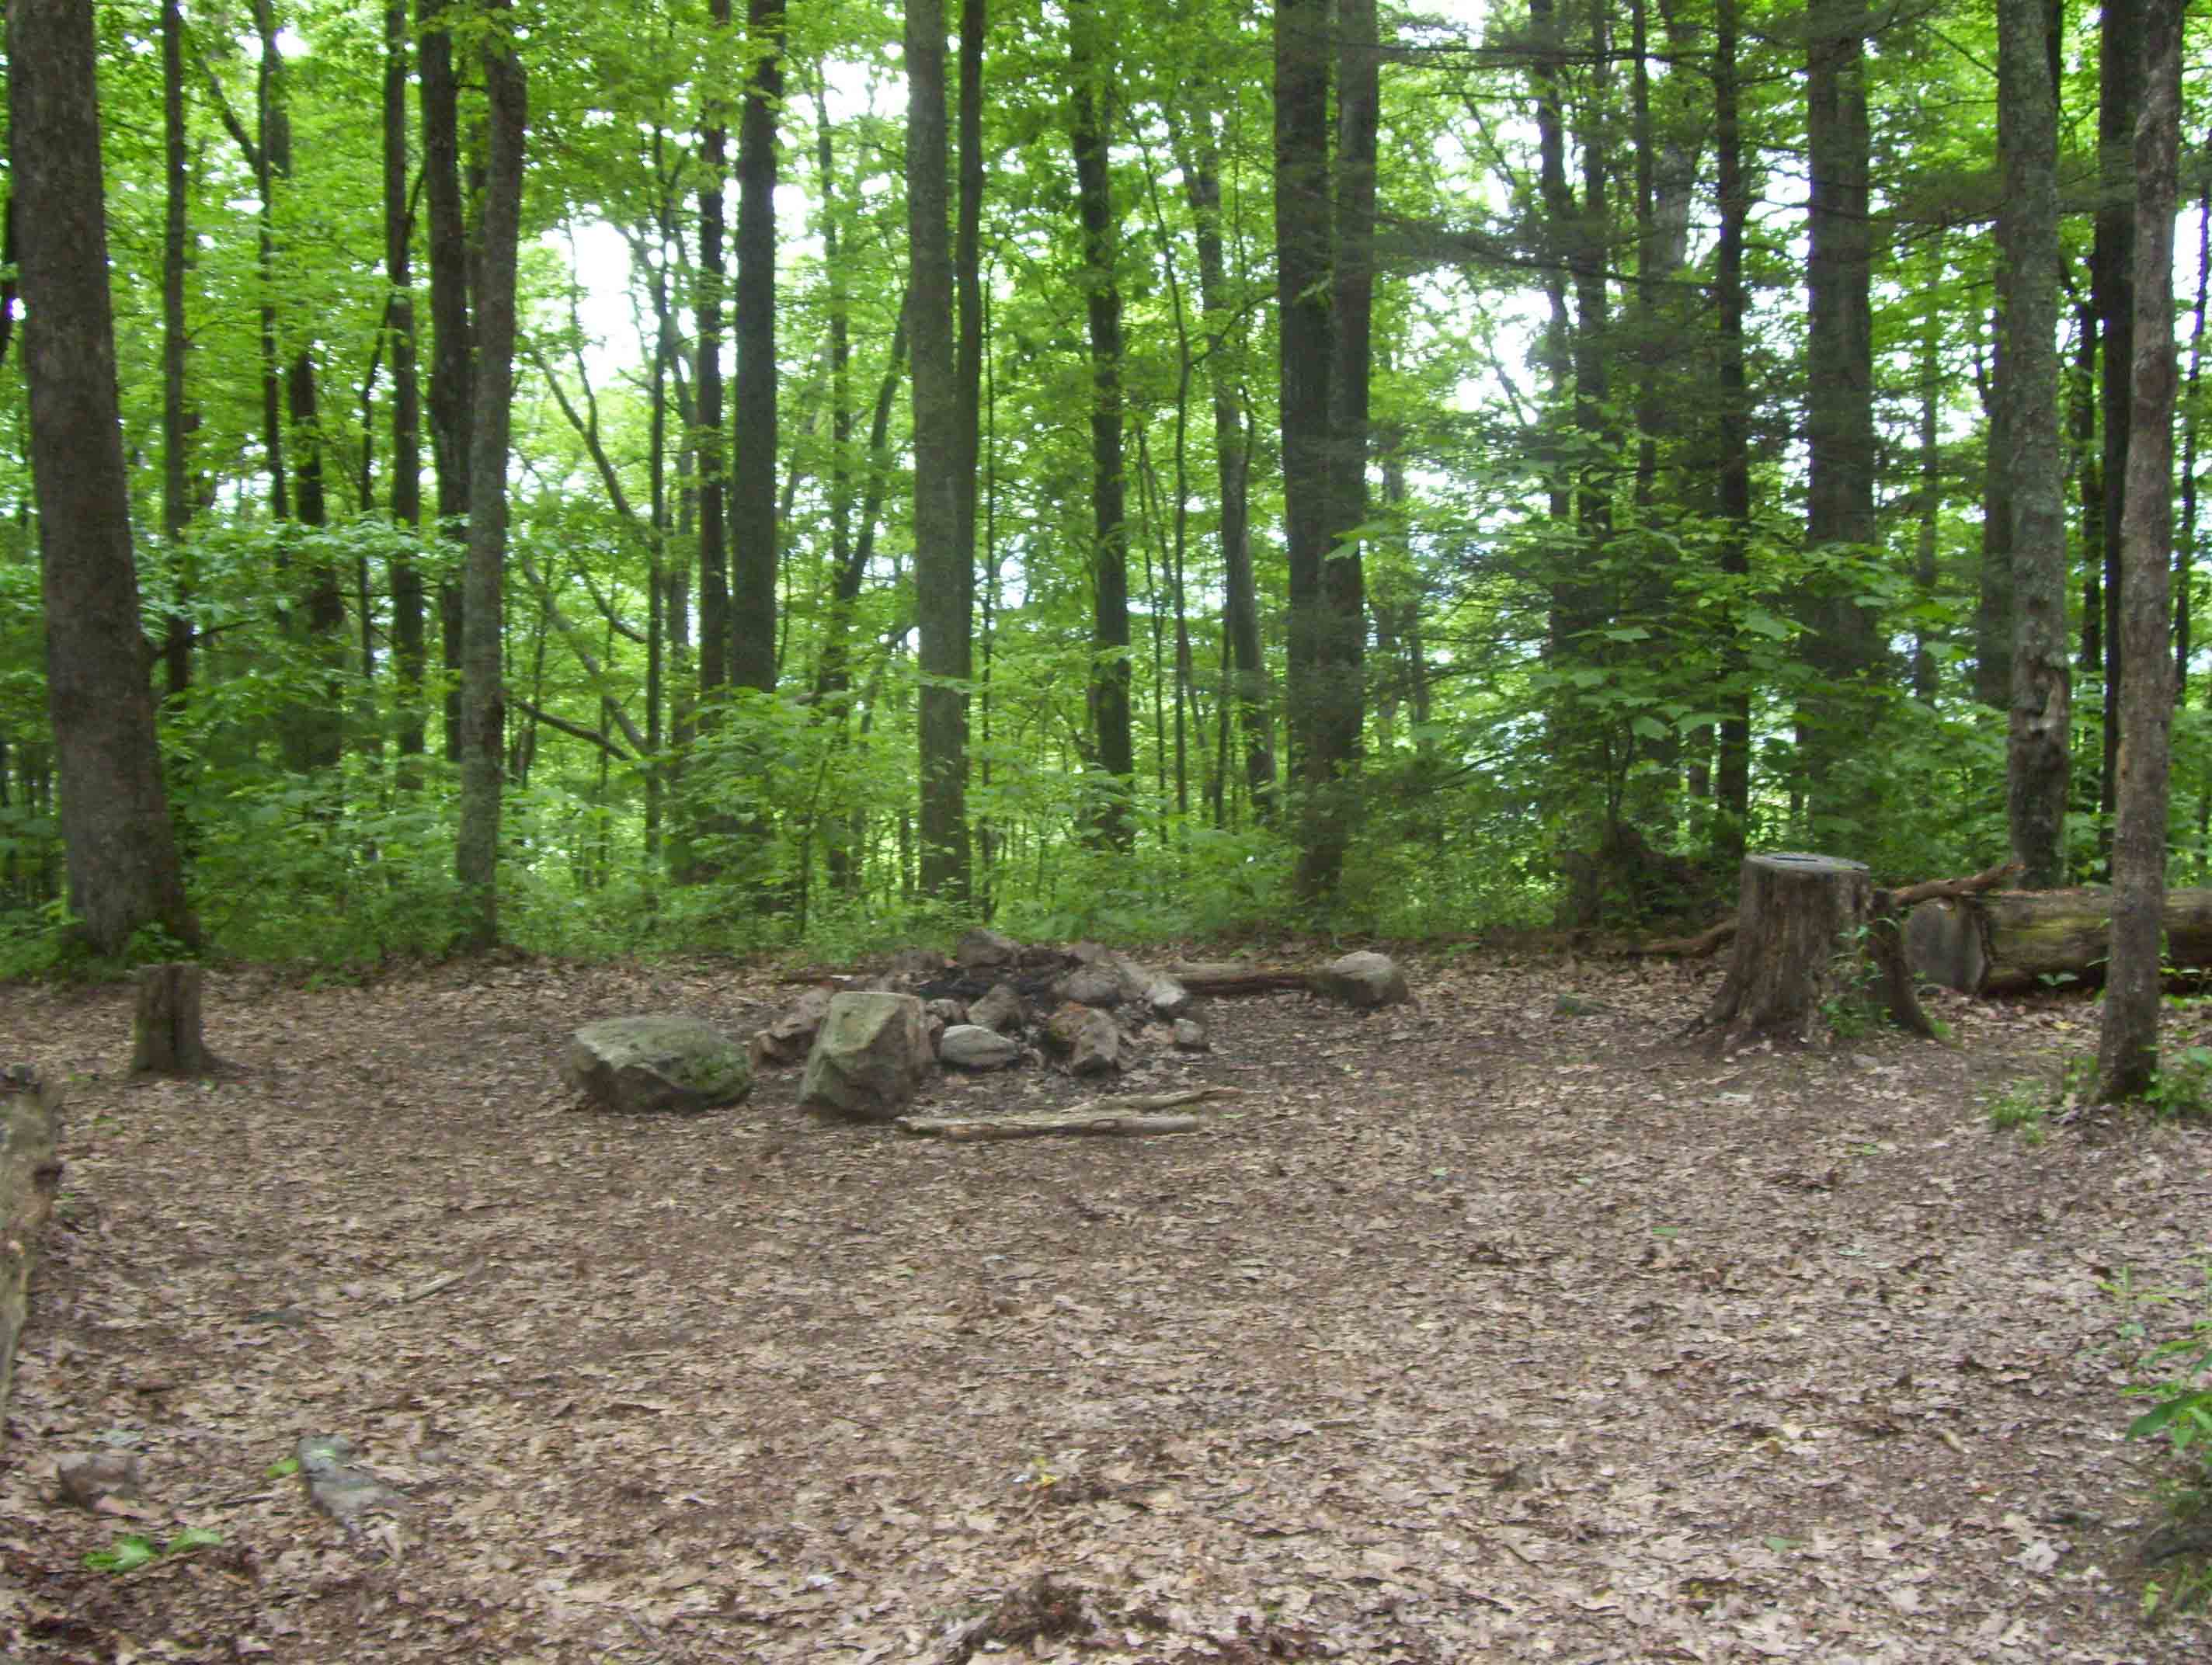 mm 2.1  Nice Campsite near the junction with the blue-blazed trail to the spring. This picture was taken in the Virginia section of TN/NC Section 1.  Courtesy dlcul@conncoll.edu